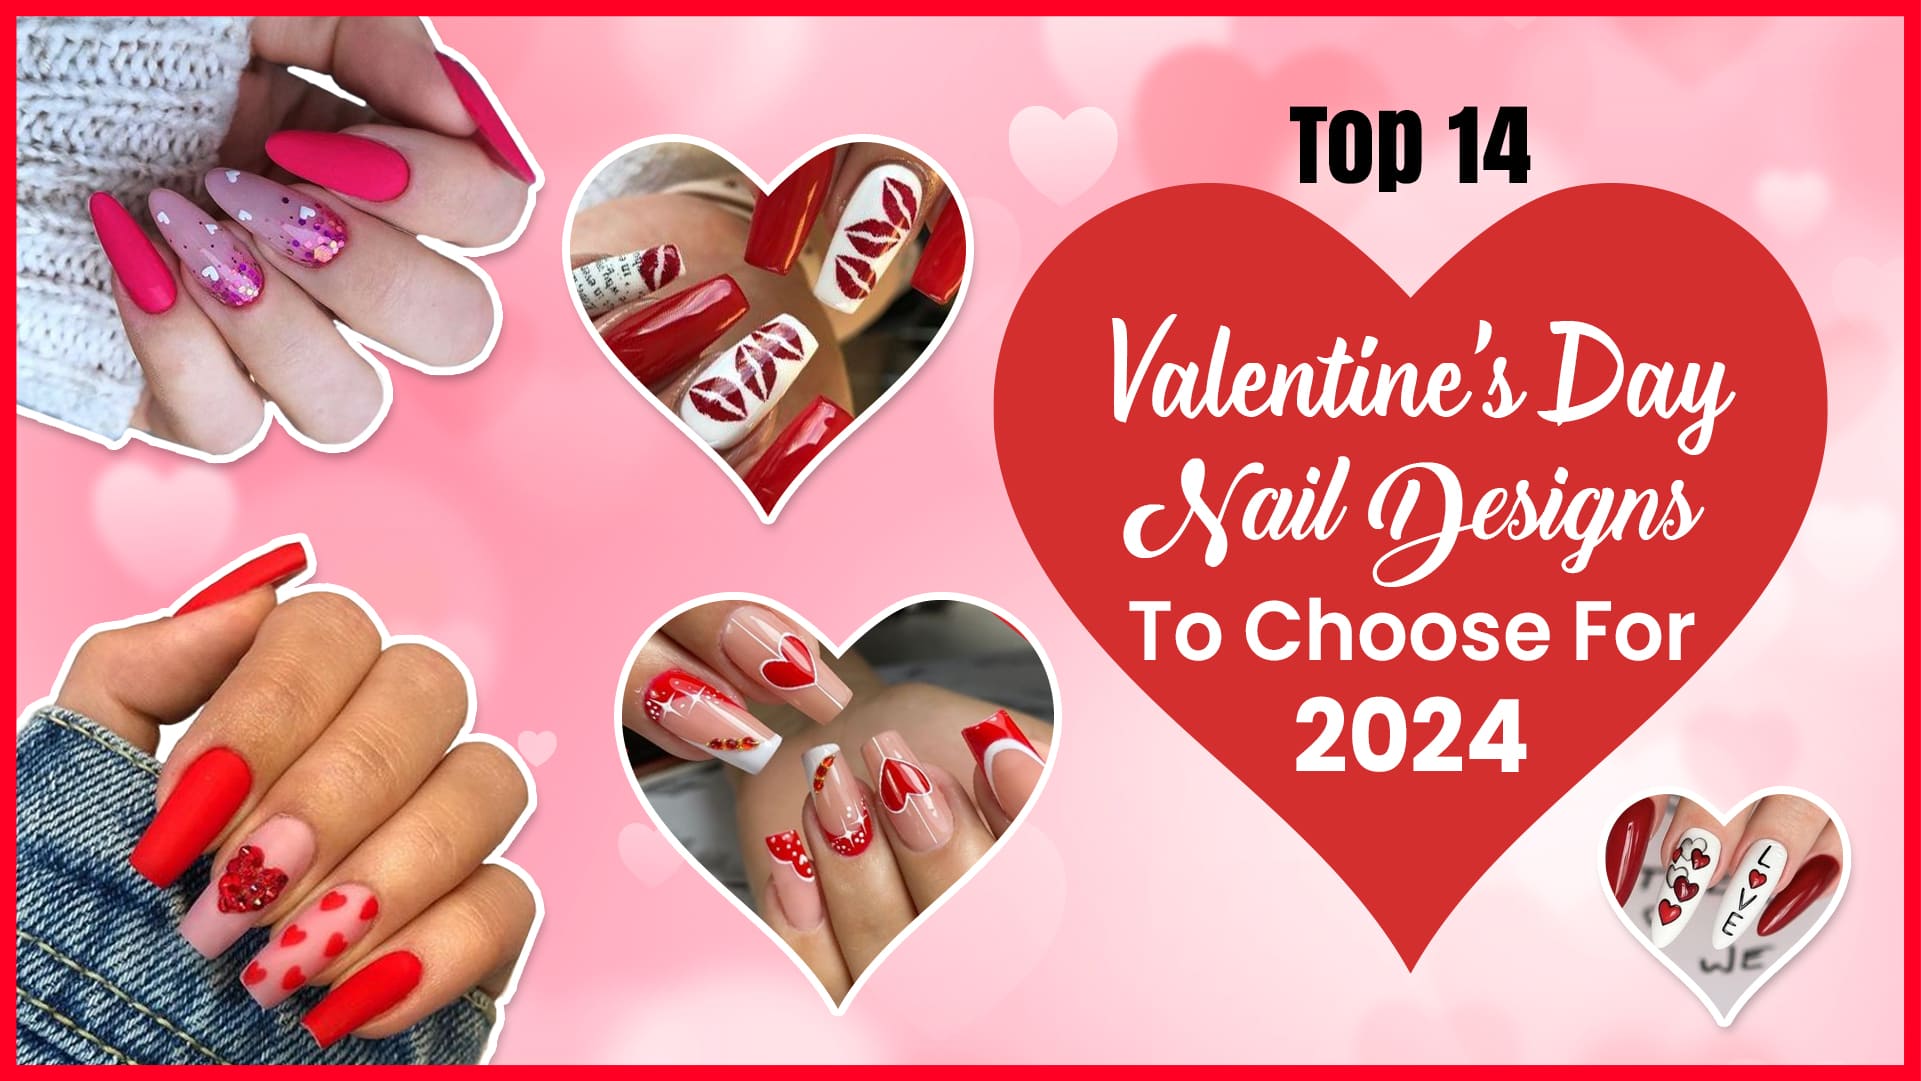 Top 14 Valentine’s Day Nail Designs To Choose For 2024